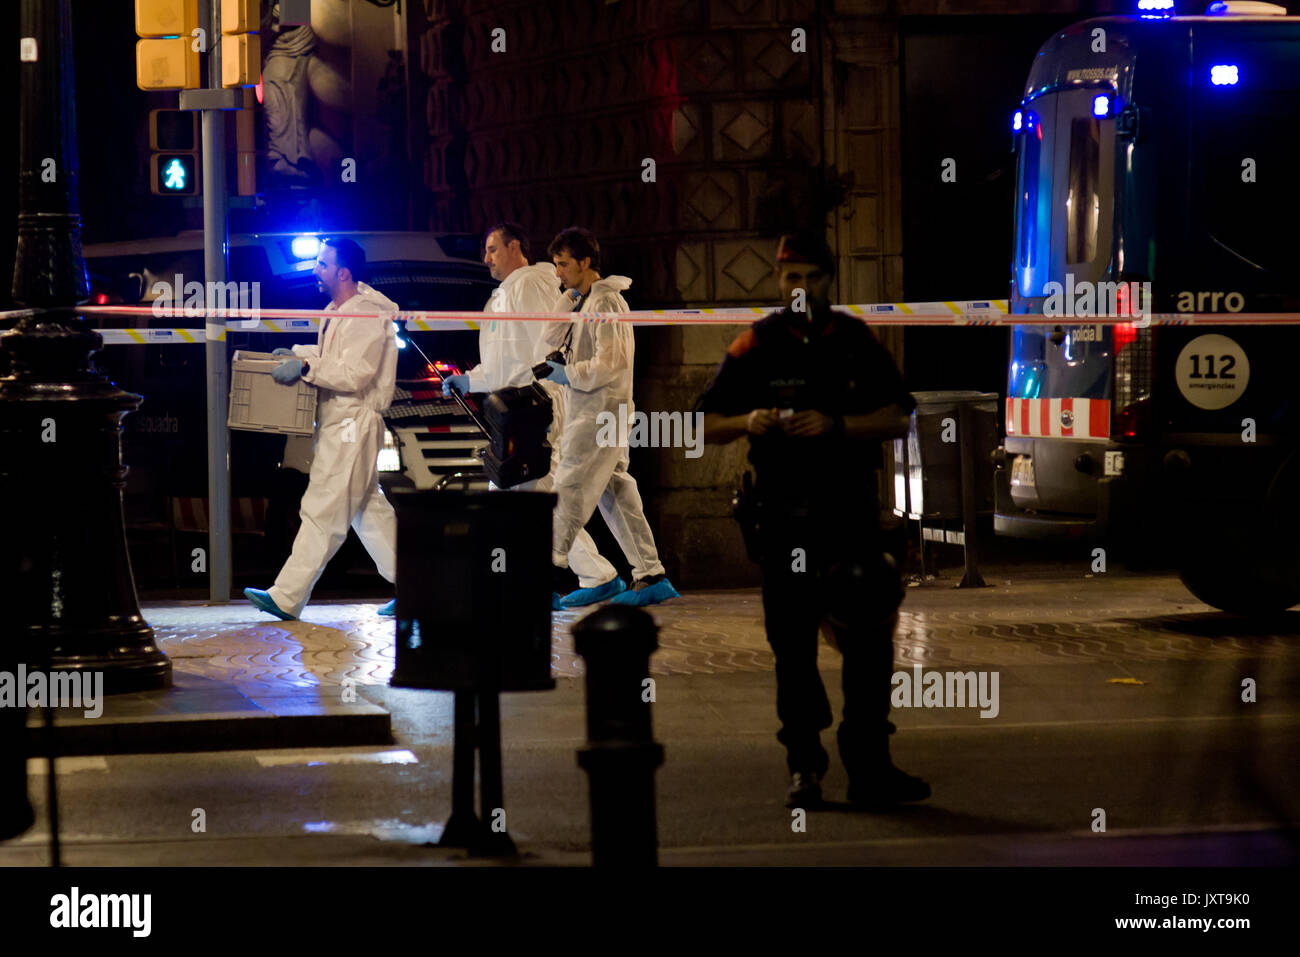 Barcelona, Catalonia, Spain. 17th Aug, 2017. Members of the scientific police walk by Las Ramblas area of Barcelona where there has been a terrorist attack. Thirteen people are dead and at least 50 injured after a van rammed into the crowd of Las Ramblas street in Barcelona. Credit: Jordi Boixareu/ZUMA Wire/Alamy Live News Stock Photo